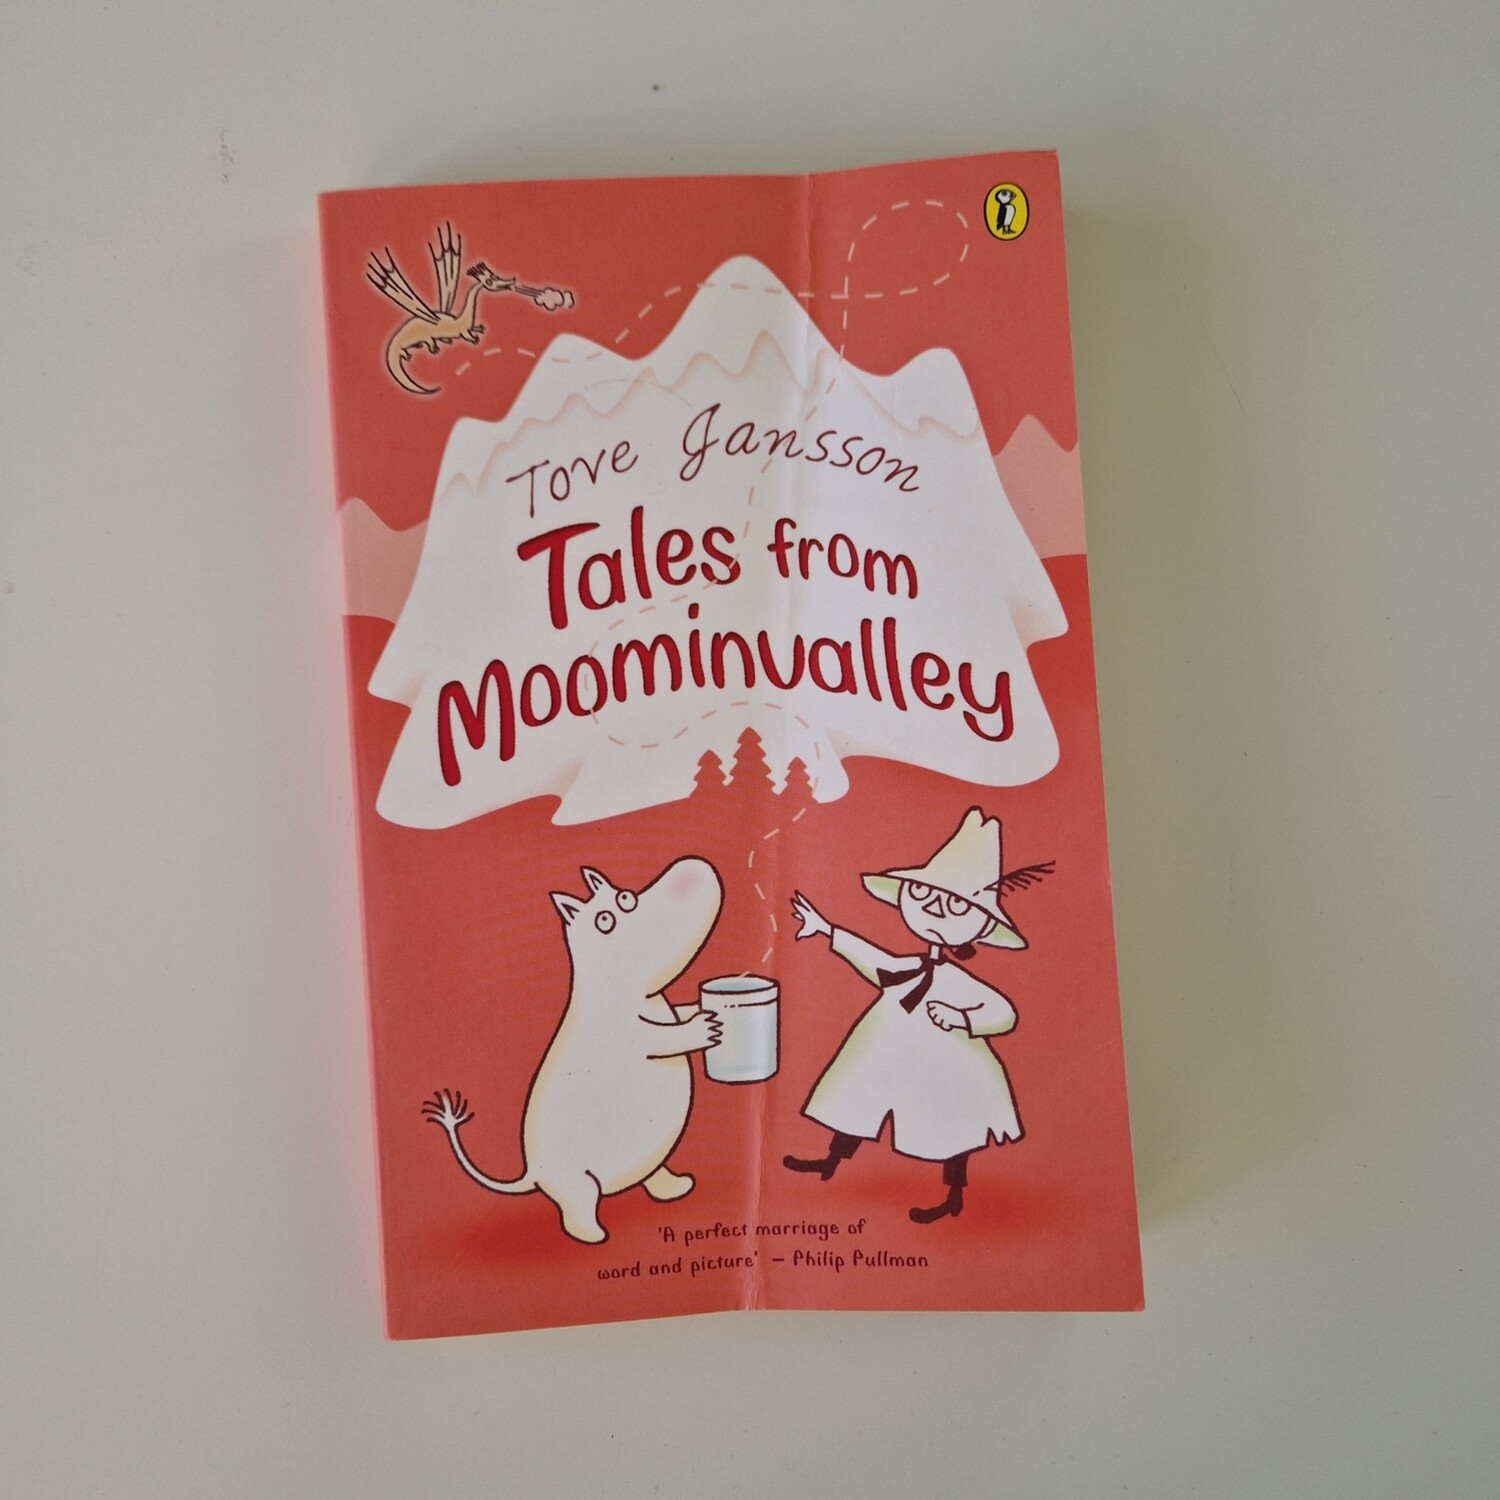 Moomins - Tales from Moominvalley - made from a paperback book